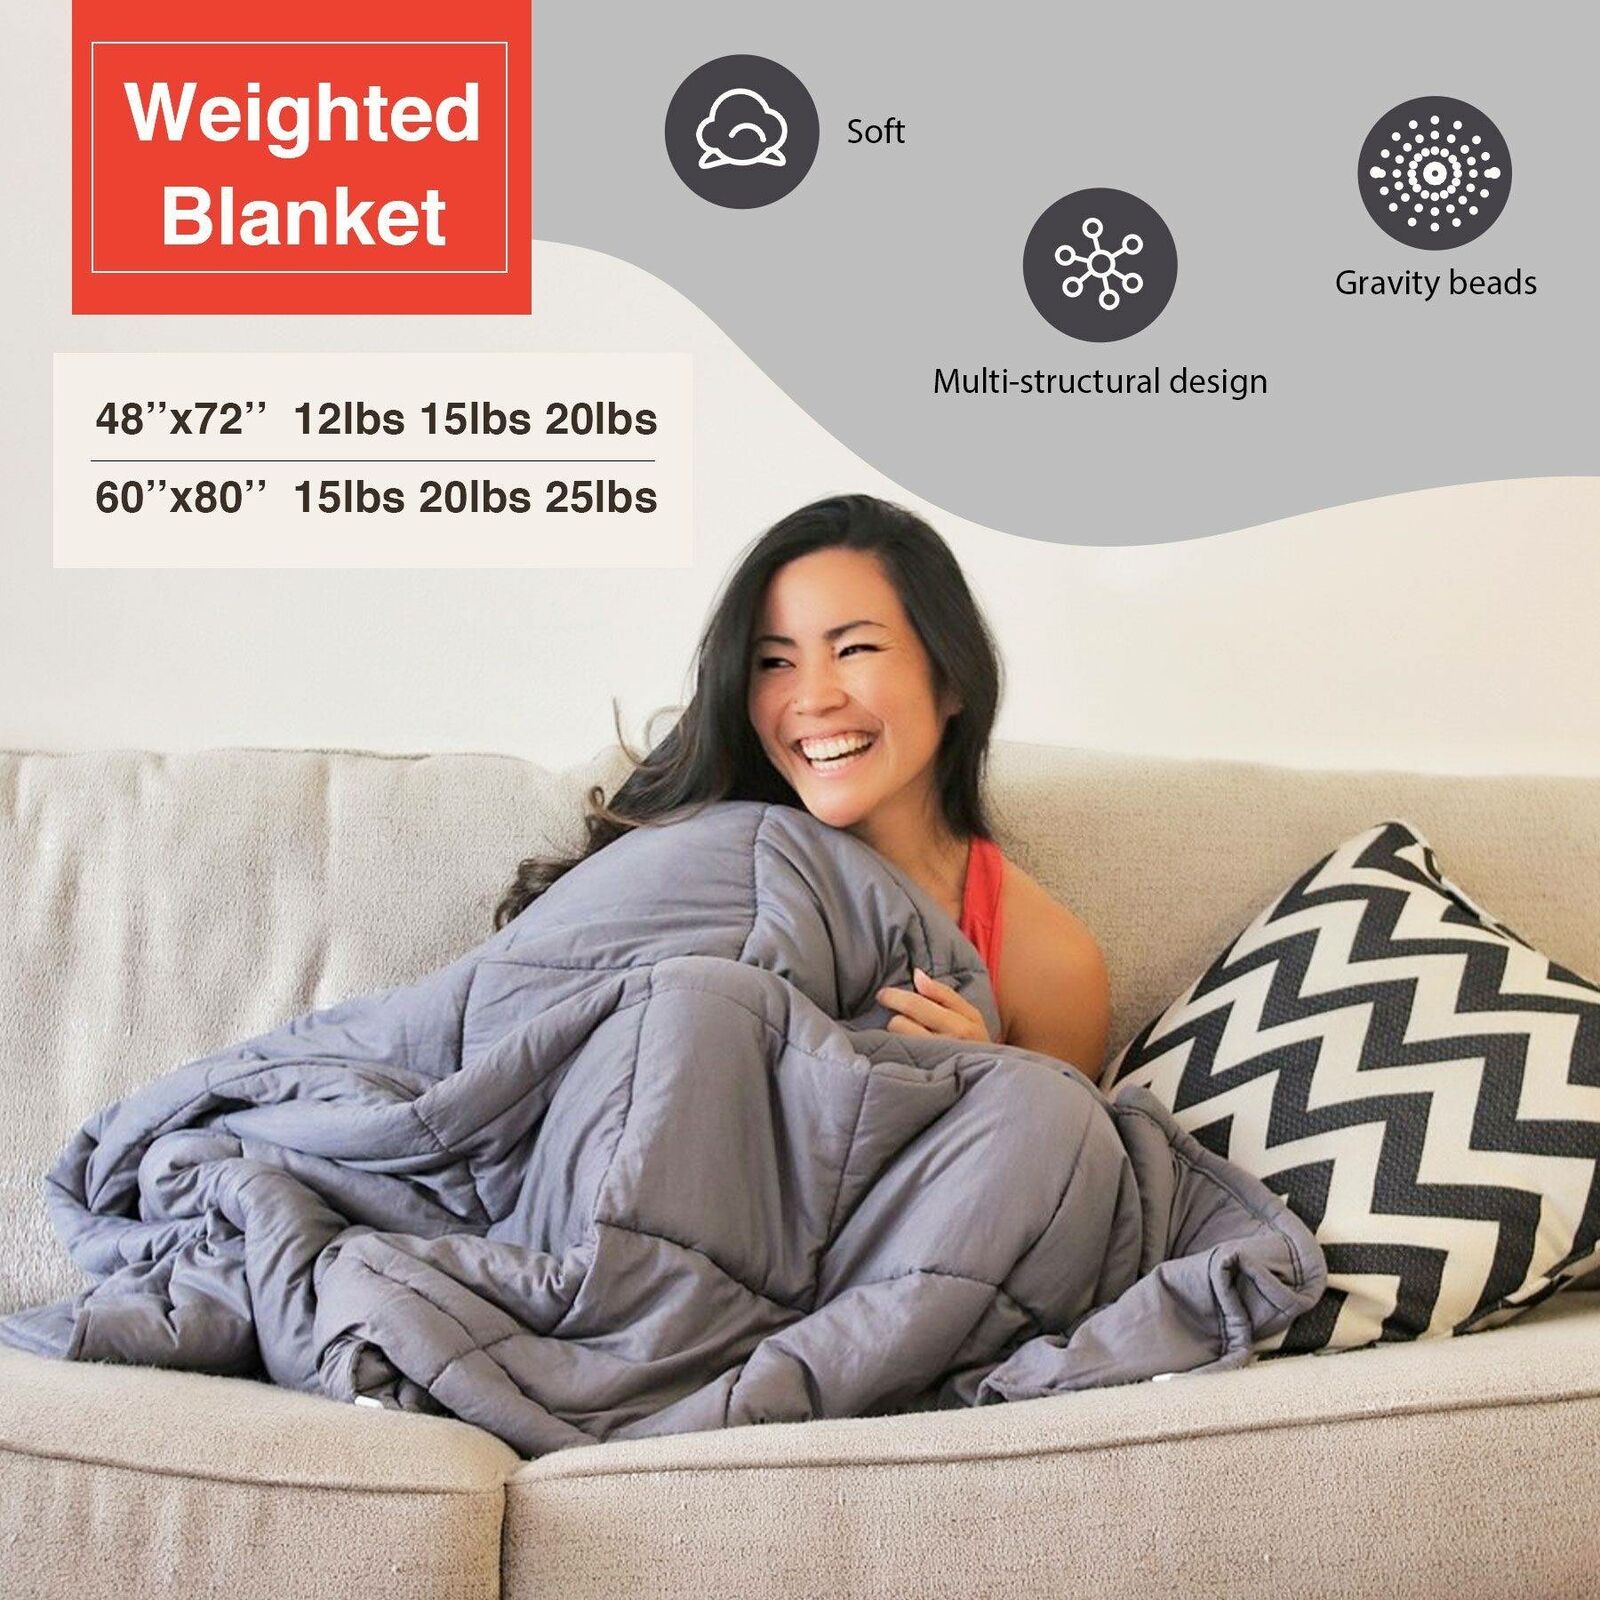 Adult Heavy Blanket with Glass Beads AN Weighted Blanket 25 lbs 60/” x 80/”, Queen Size